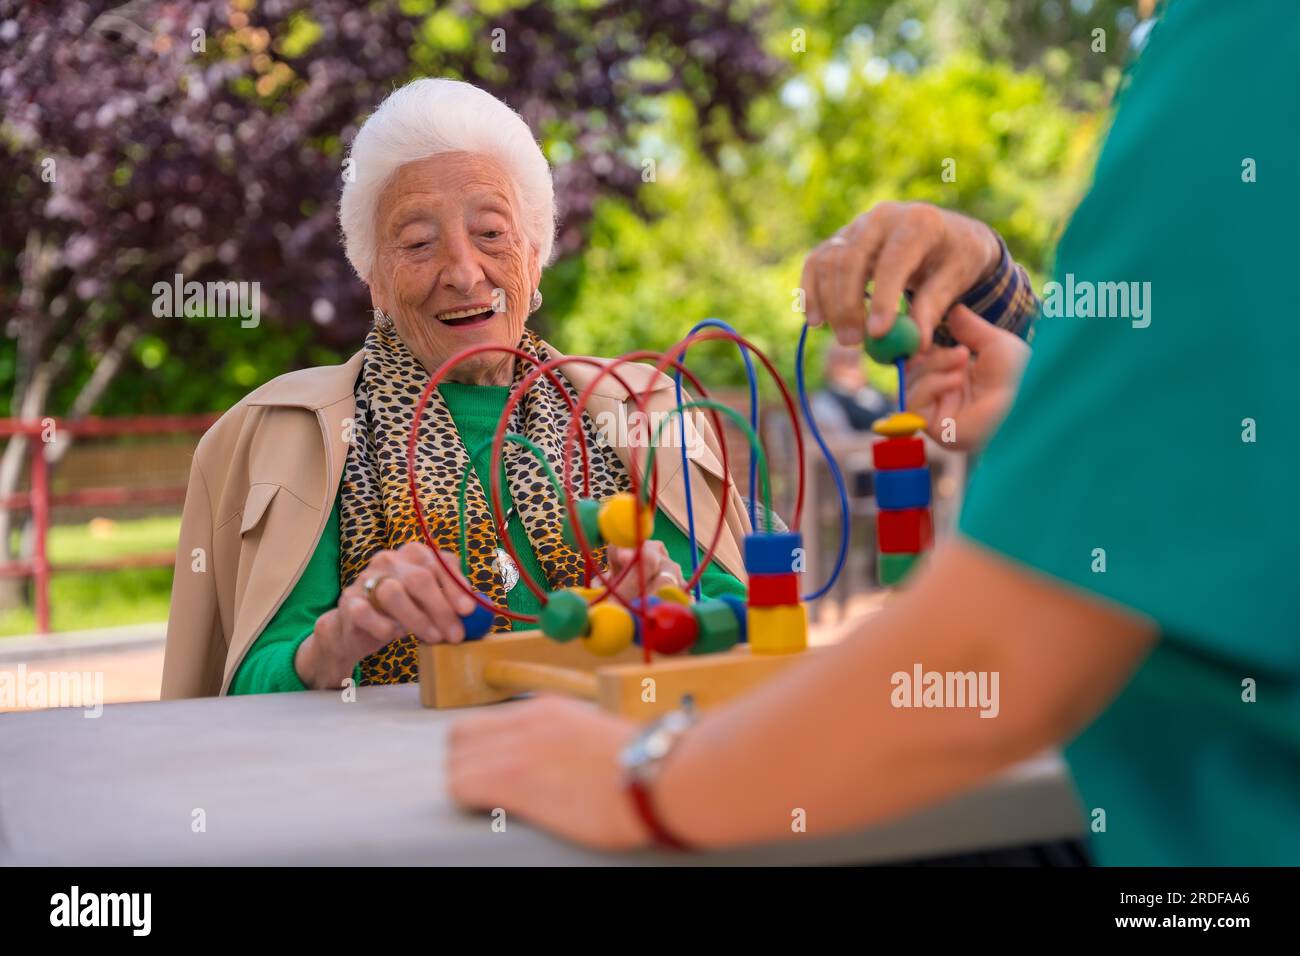 Hand of an elderly woman in the garden of a nursing home or retirement home playing with games to improve the mobility of the hands smiling Stock Photo